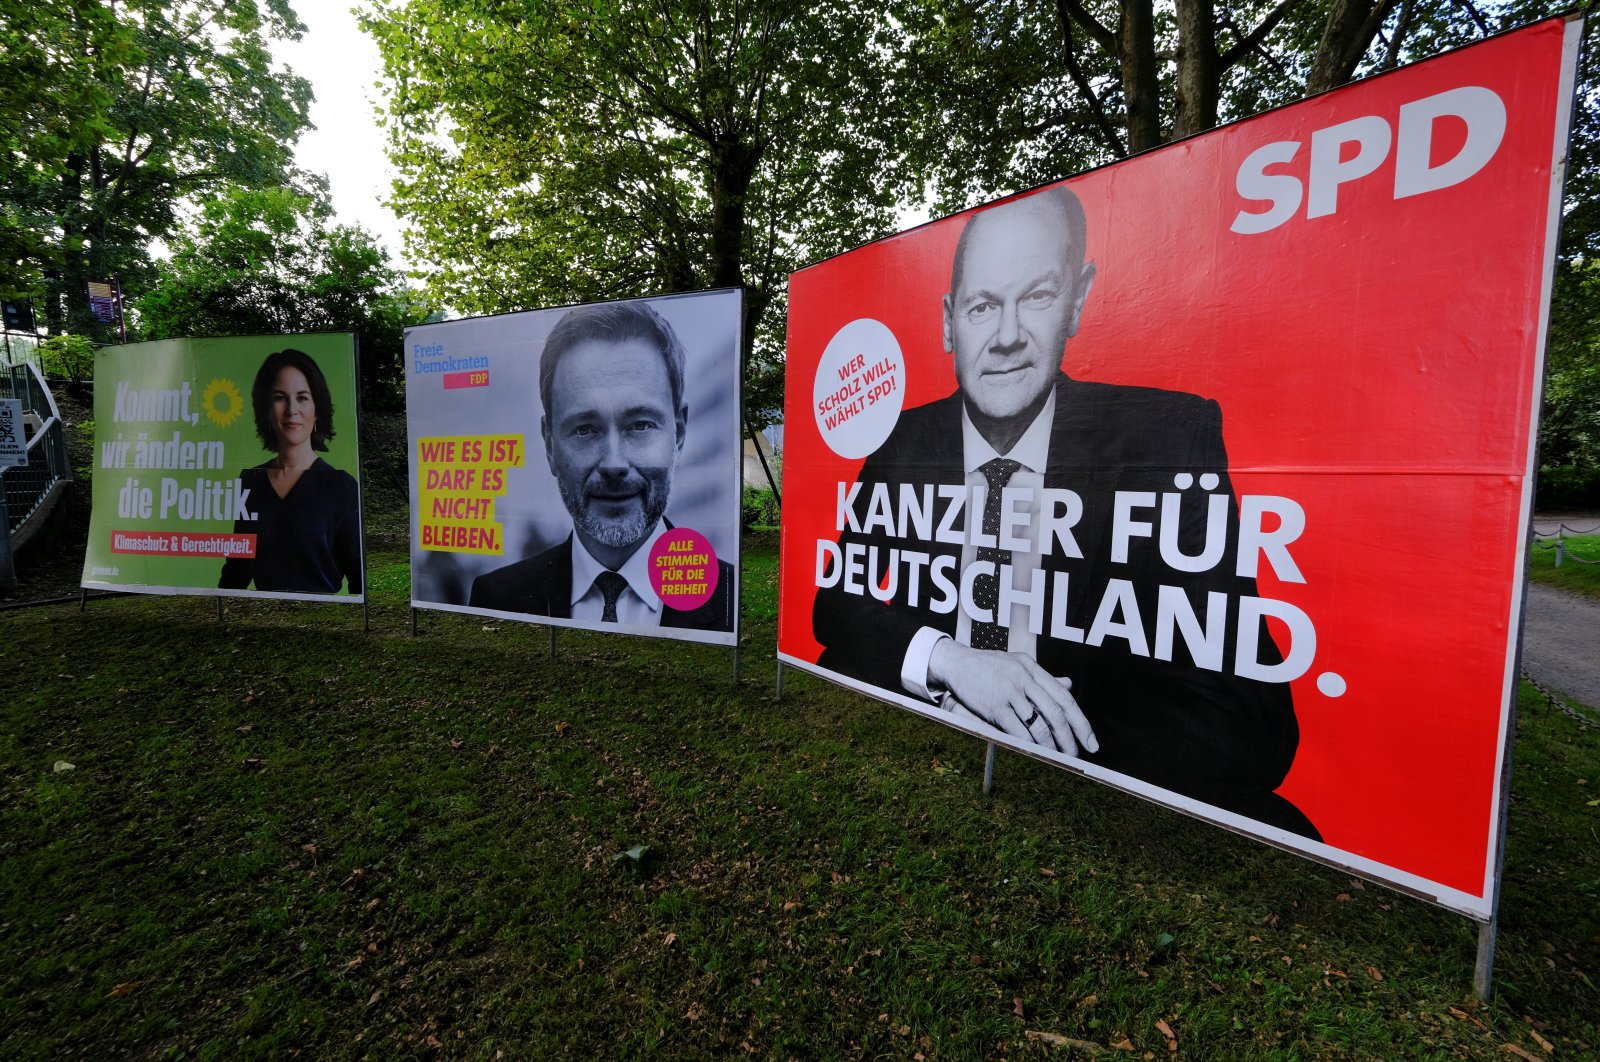 Election posters of the Social Democratic Party's (SPD) candidate for chancellor, Olaf Scholz, Christian Lindner of the liberal Free Democratic Party (FDP) and Greens party co-leader Annalena Baerbock are pictured in a park of Bad Honnef, south of Bonn, Germany, Oct. 1, 2021. (Reuters Photo)